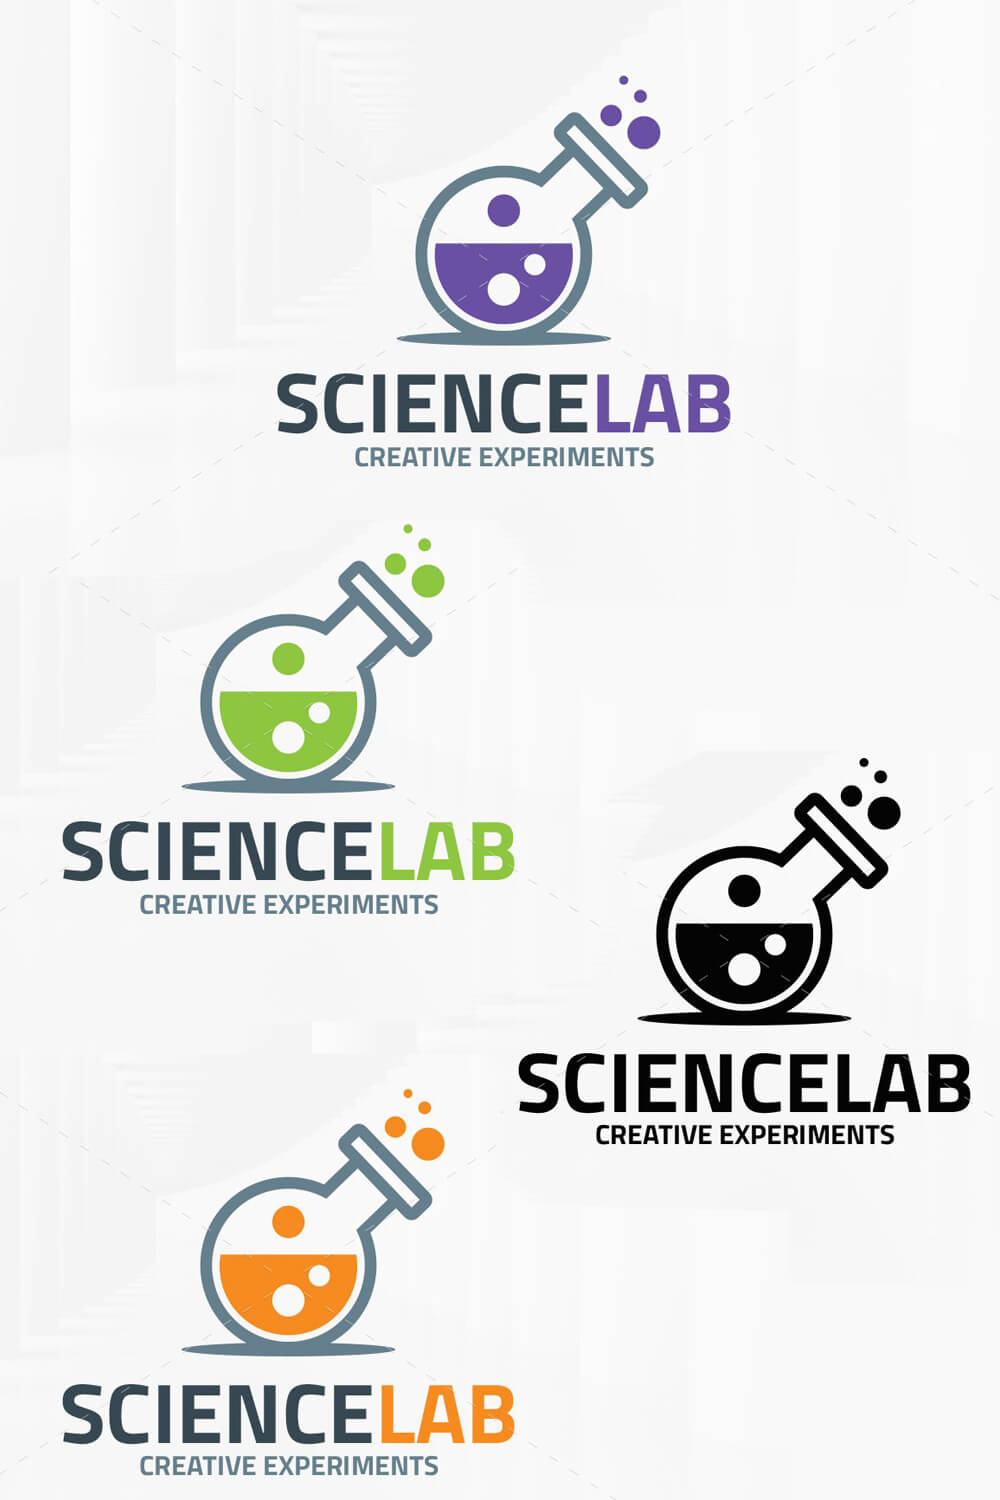 Four multi-colored science laboratory logos are drawn on a white background.